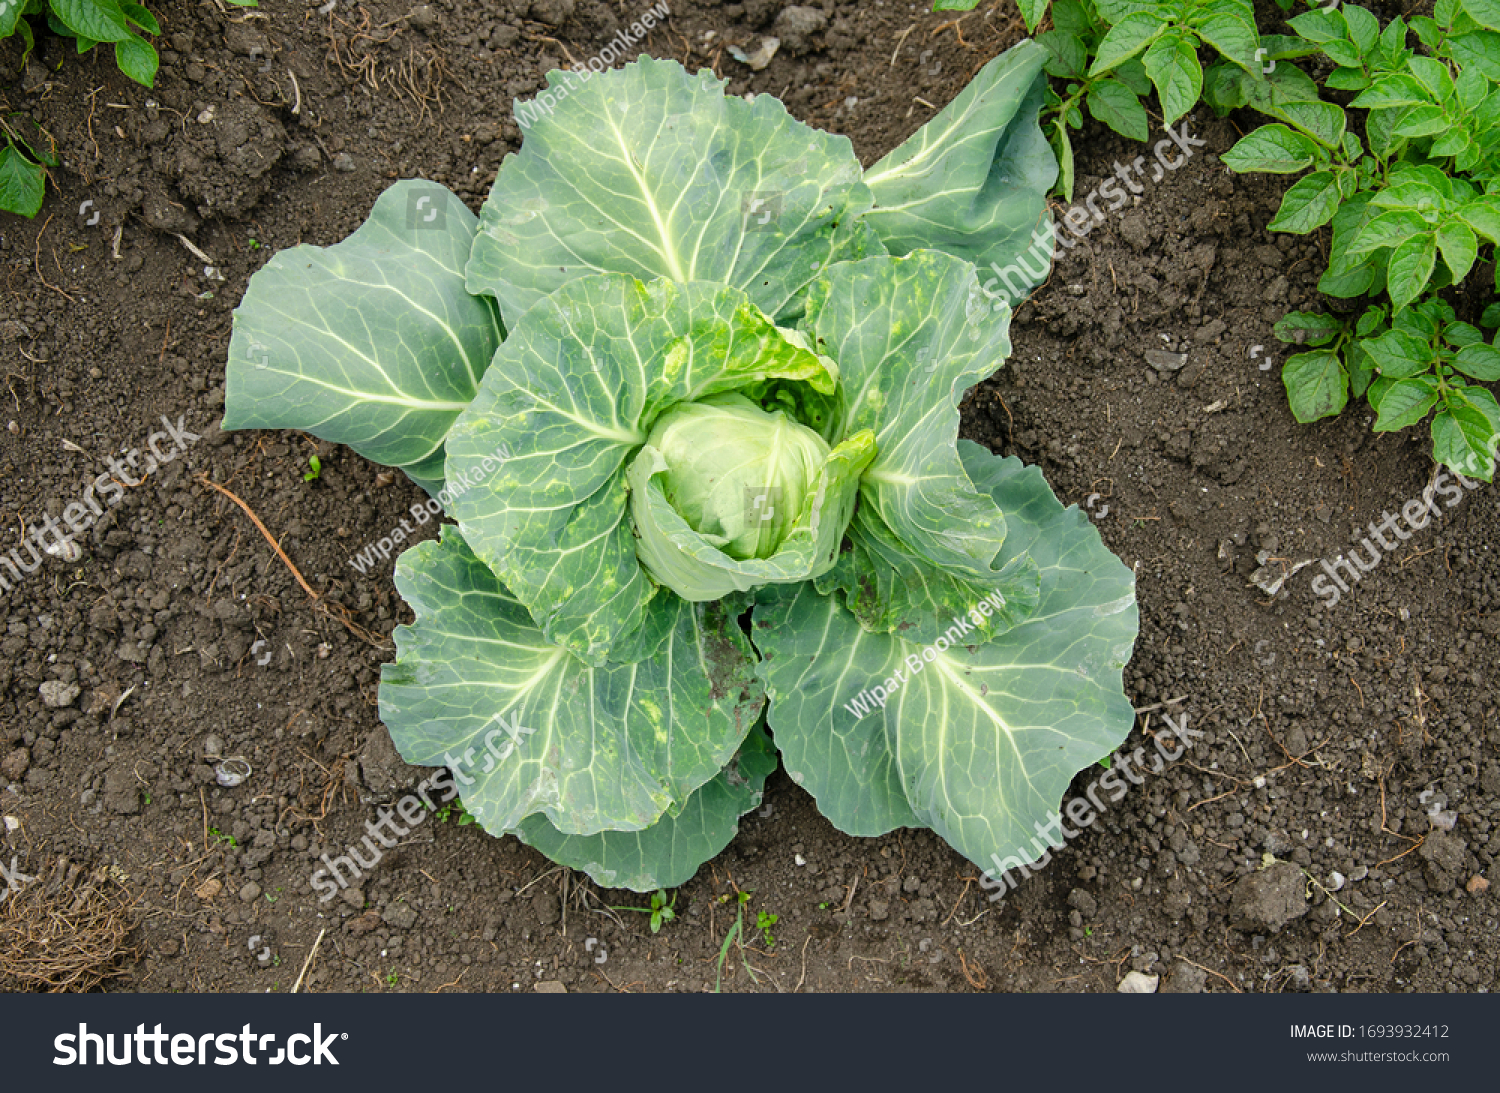 Fresh cabbage from farm field. View of green cabbages plants.Non-toxic cabbage.Non-toxic vegetables.Organic farming. #1693932412